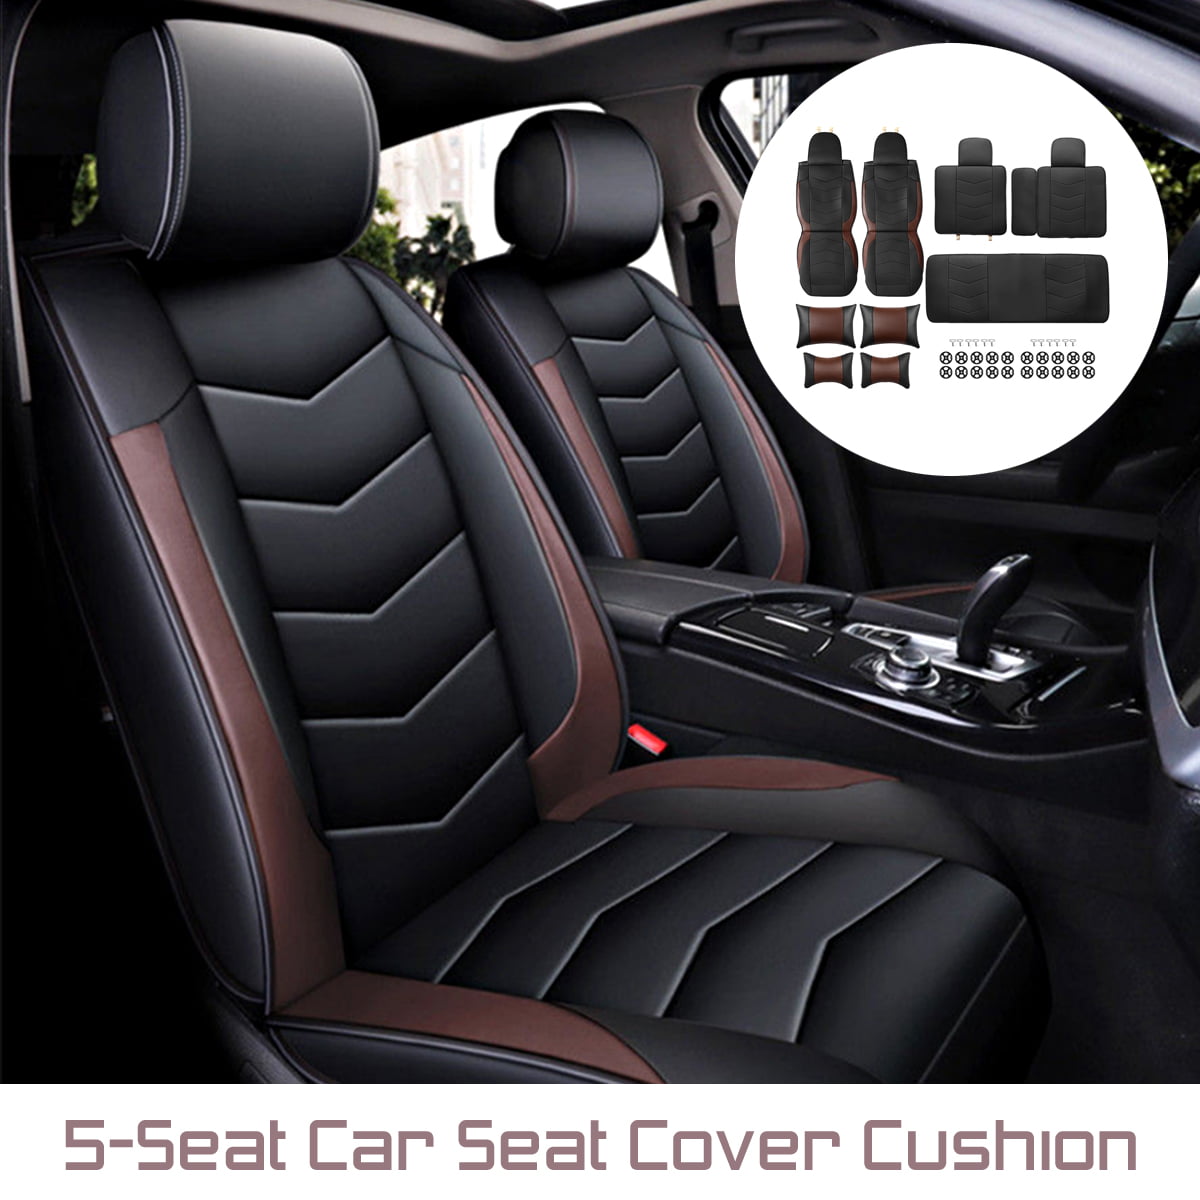 CARMAE Car Seat Covers Full Set Premium Faux Leather Automotive Front and Back Seat Protectors Leather Look Car Seat Covers Car Accessories